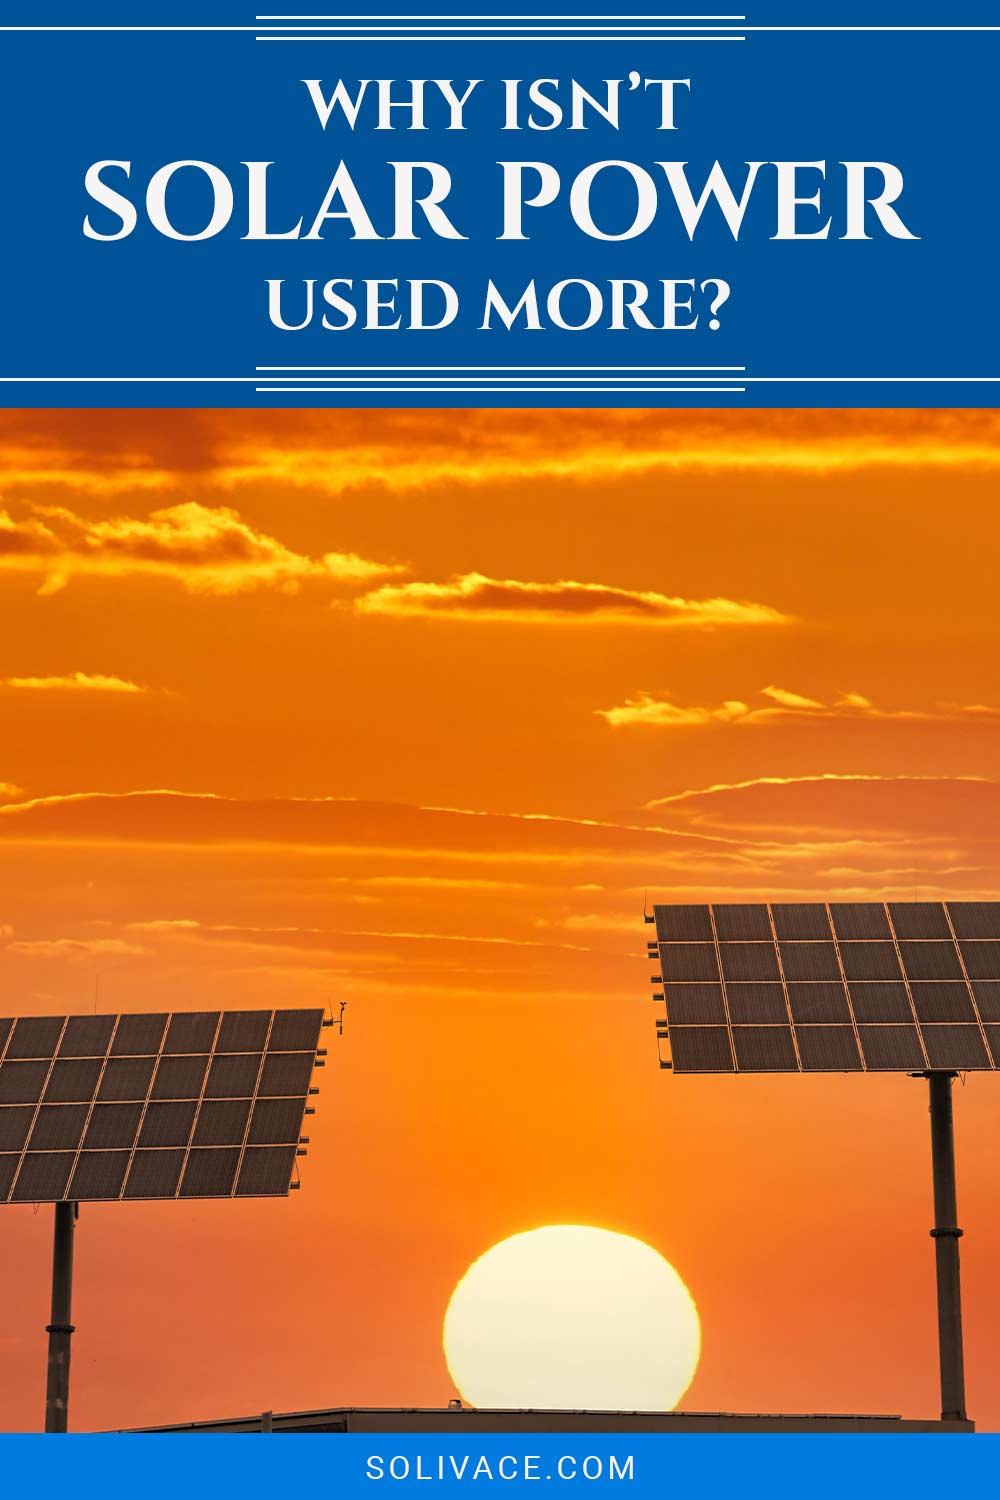 Why Isn’t Solar Power Used More?